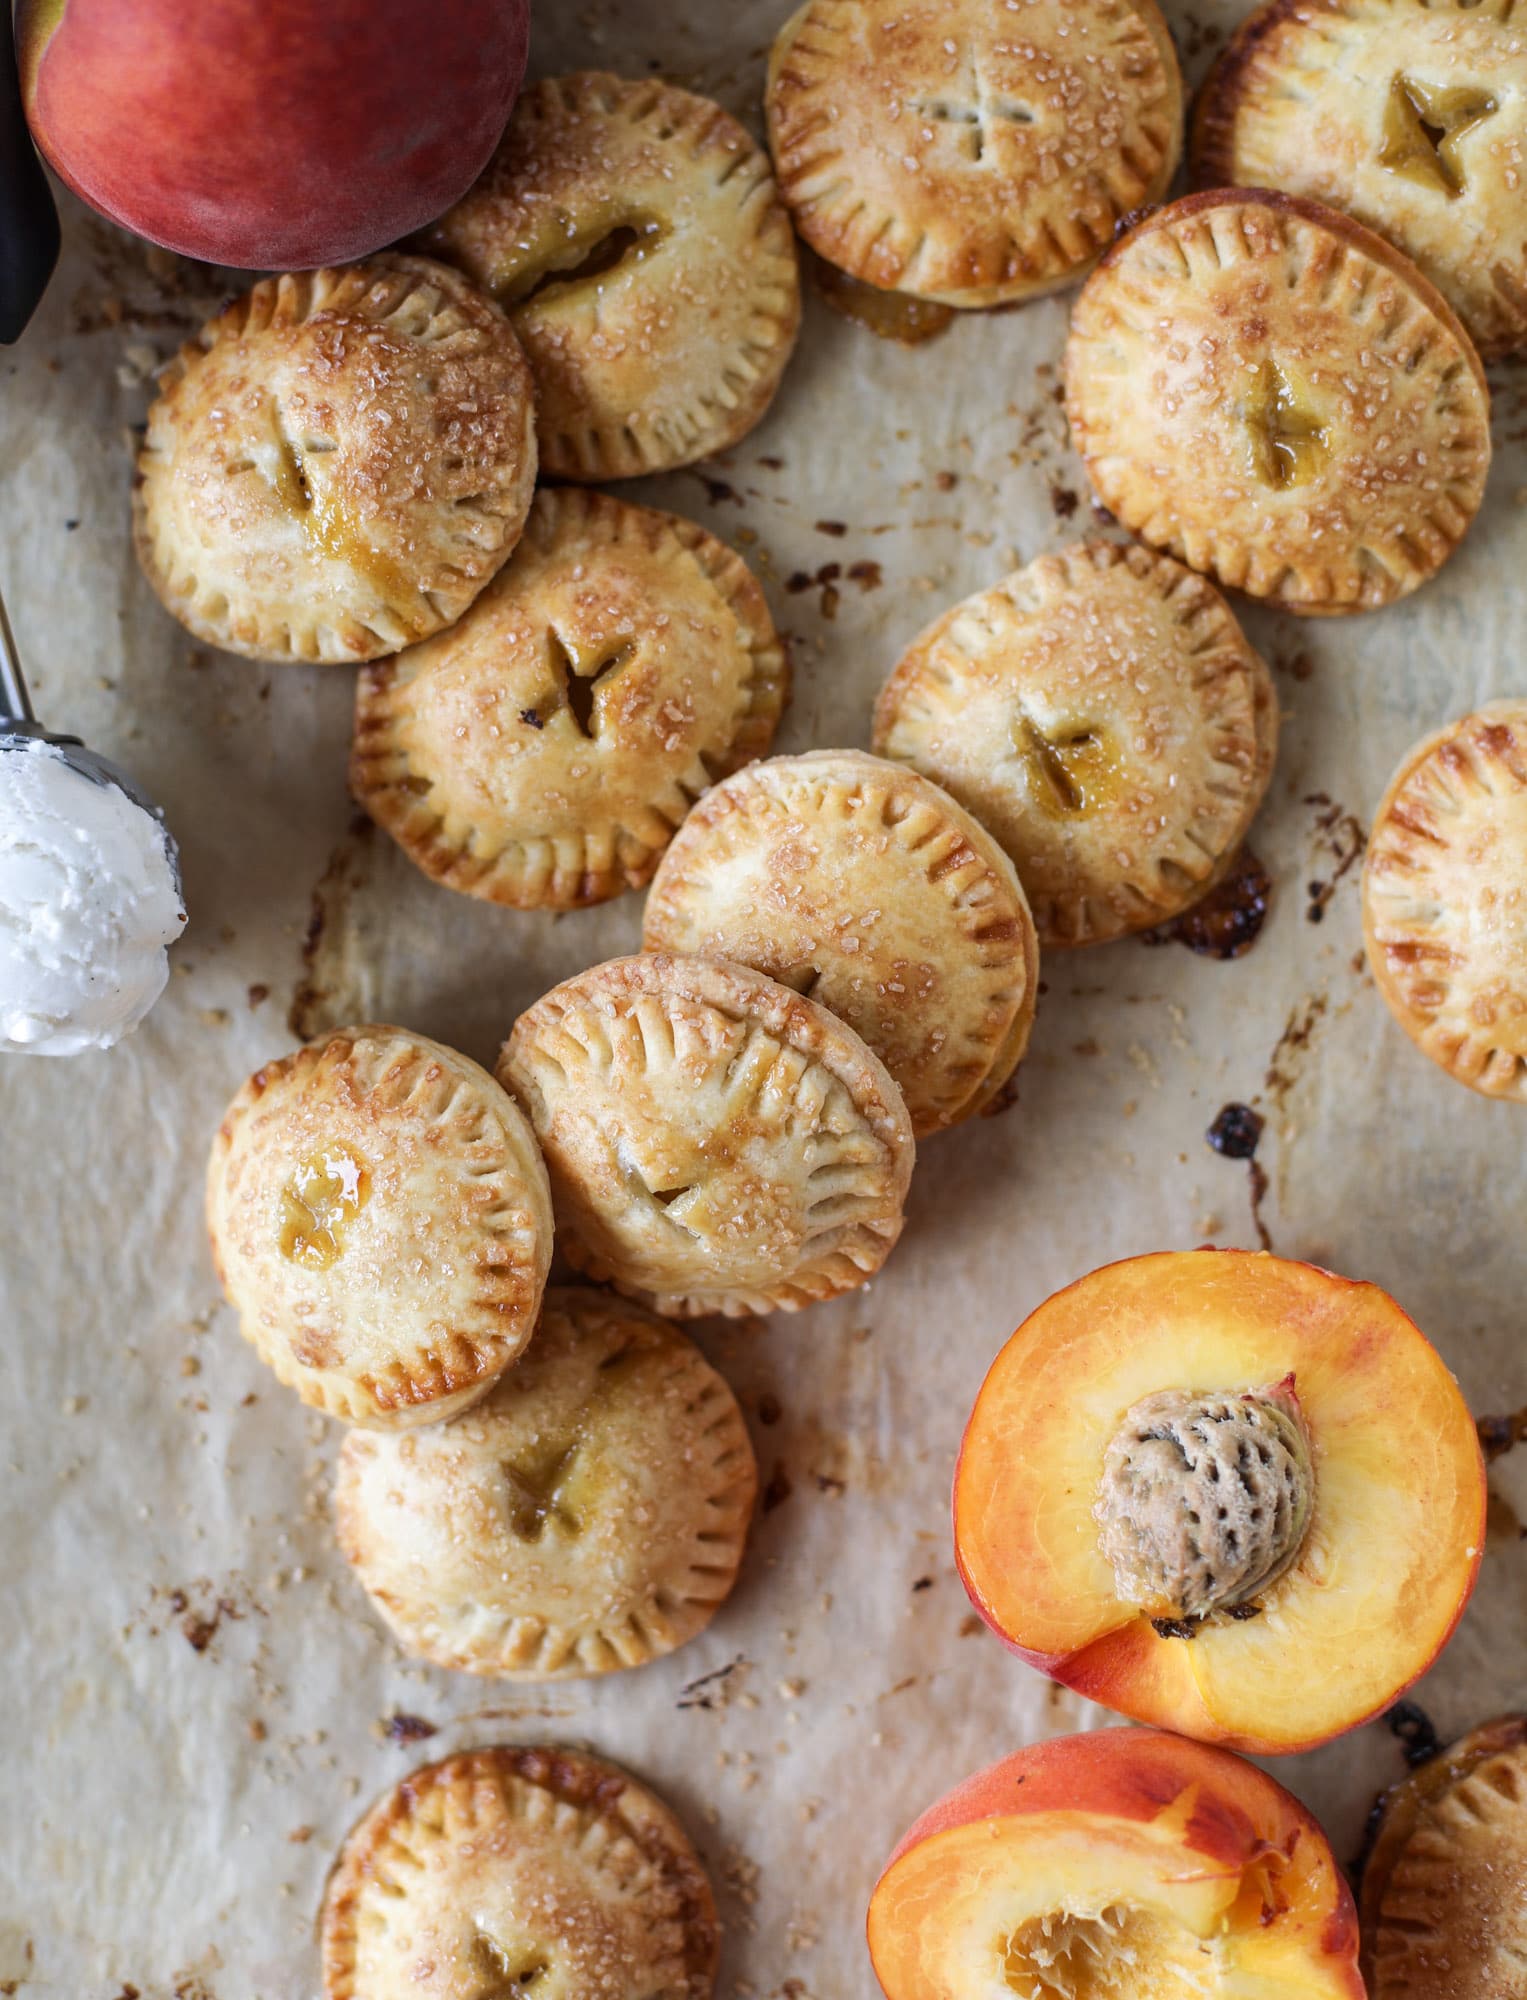 These little peach hand pies are super easy to make and oh-so delicious for summer! A warm and syrupy homemade peach filling made with brown sugar and bourbon, stuck inside a flakey all-butter crust and sprinkled with coarse sugar. SO GOOD. I howsweeteats.com #peach #hand #pies #mini #dessert #summer